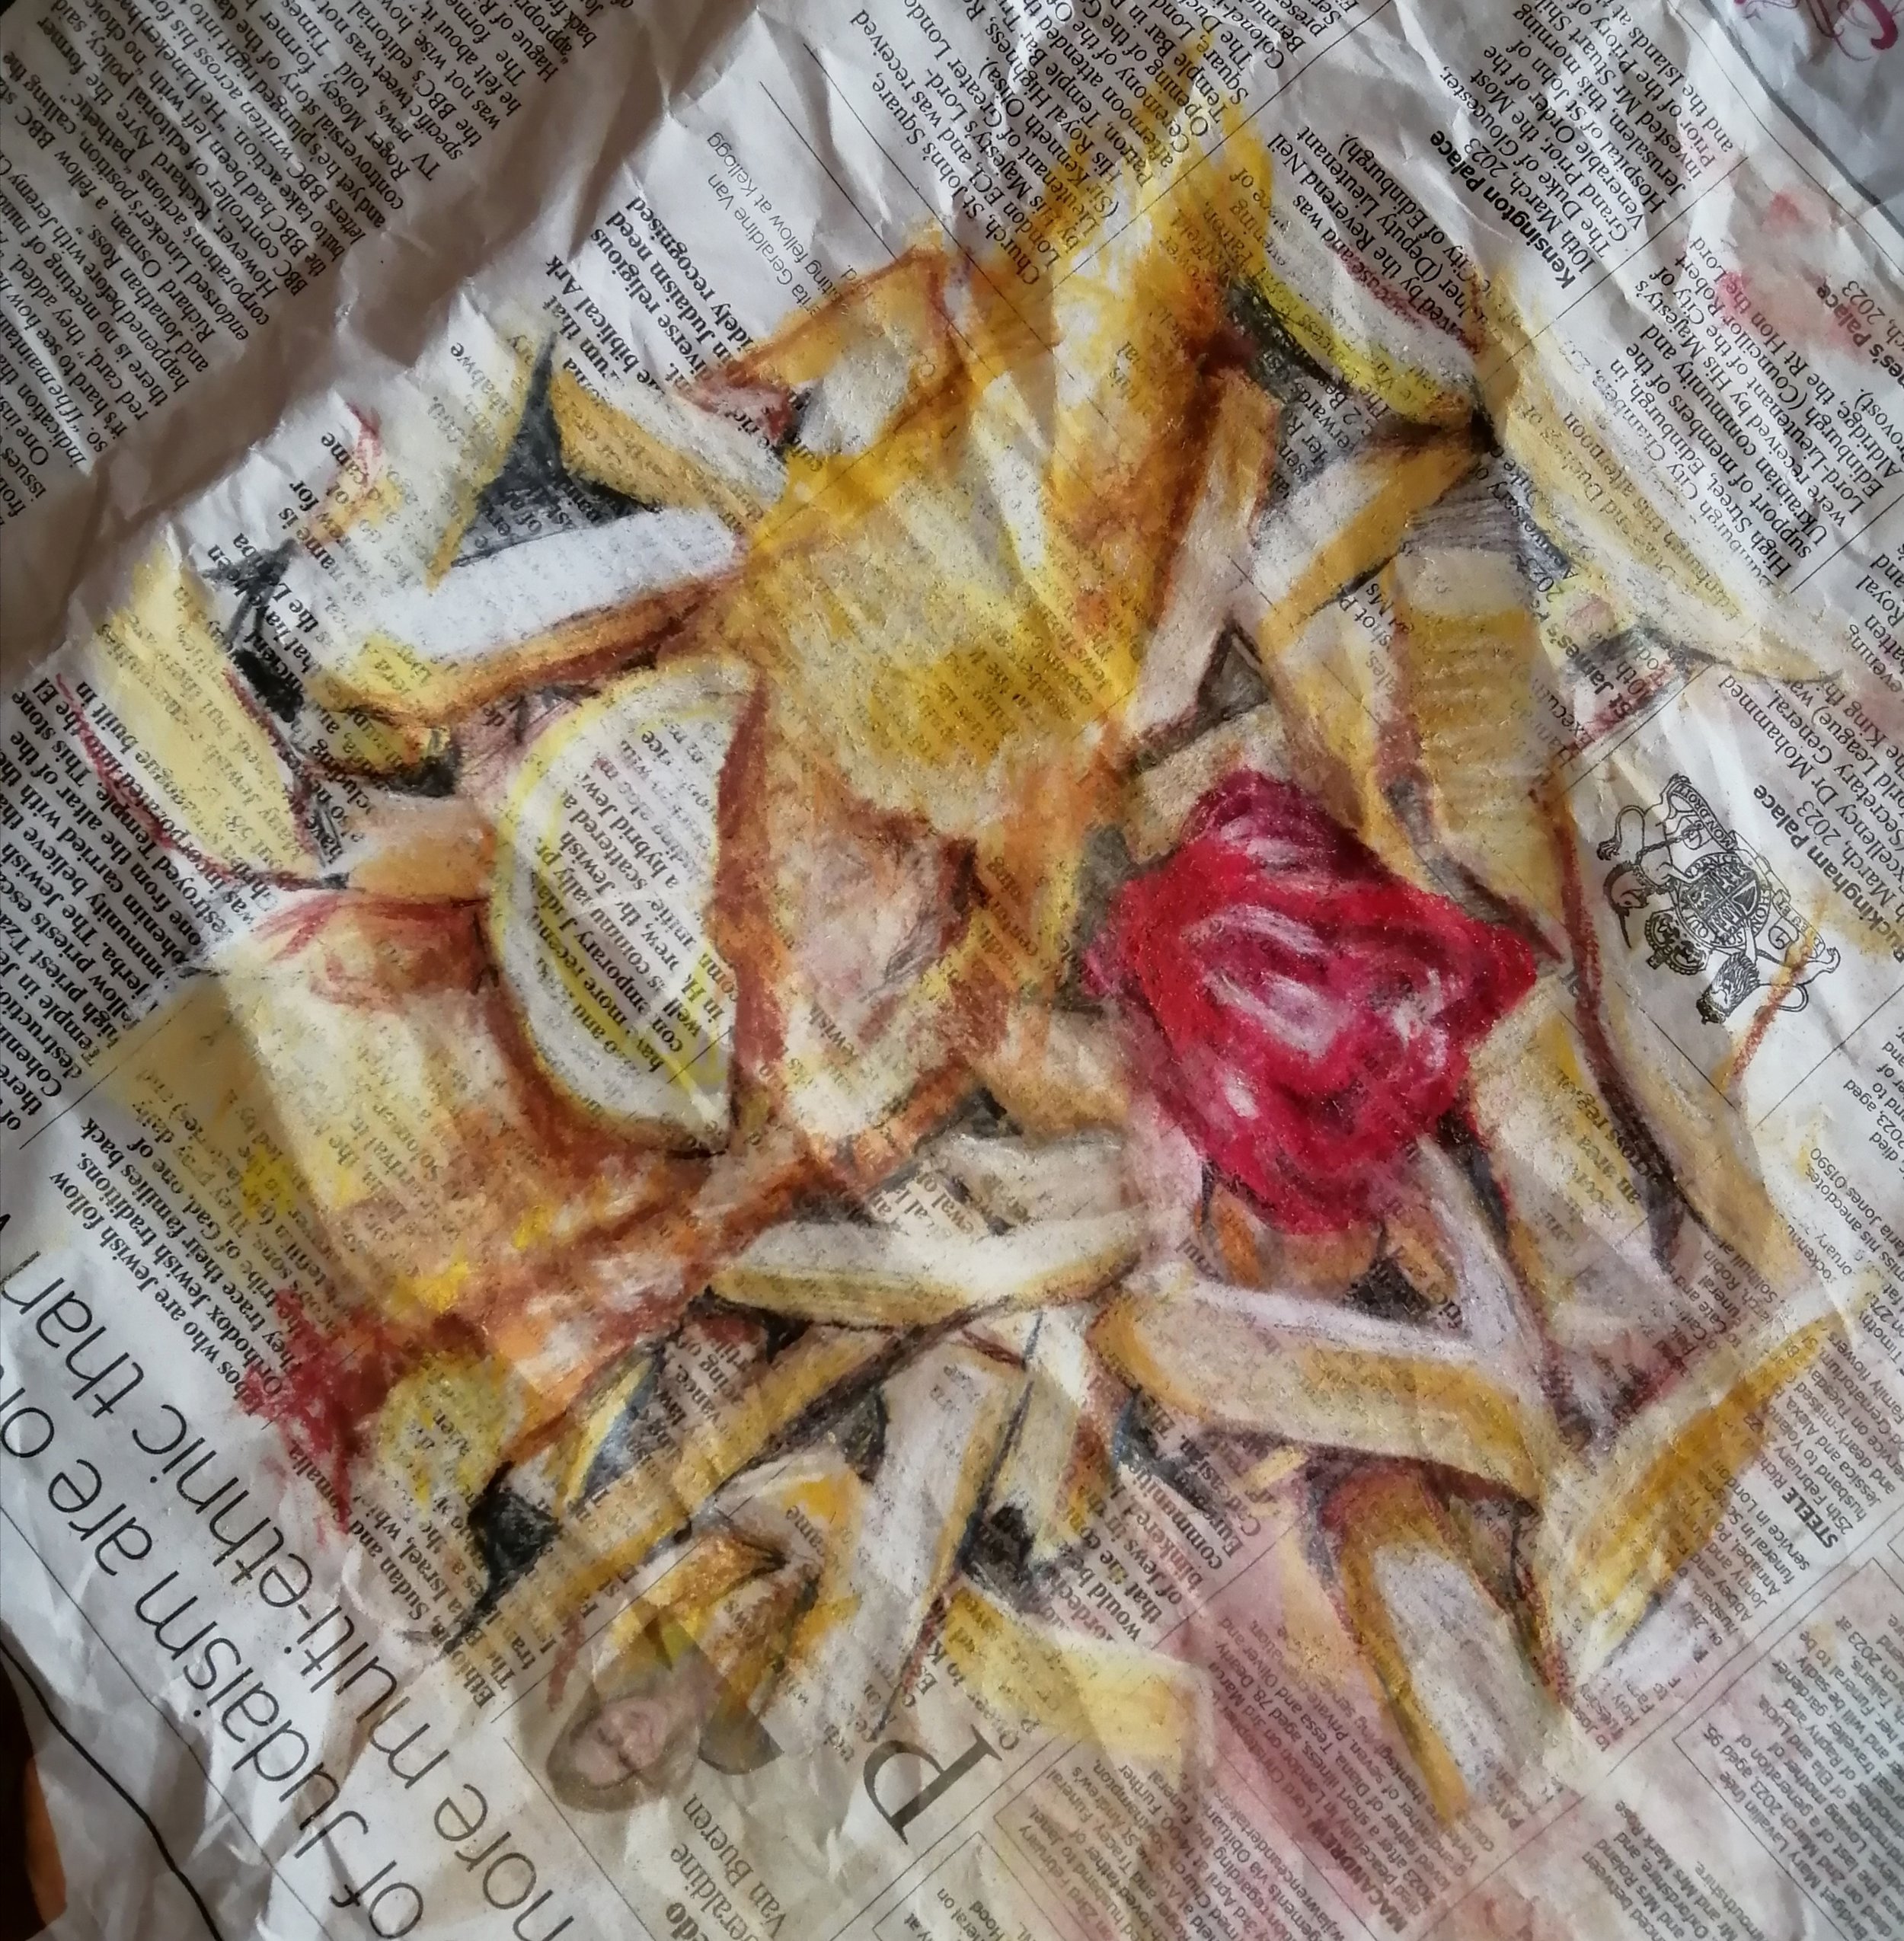  Fish, chips, and a dollop of ketchup, day 2  Pastel on newspaper 